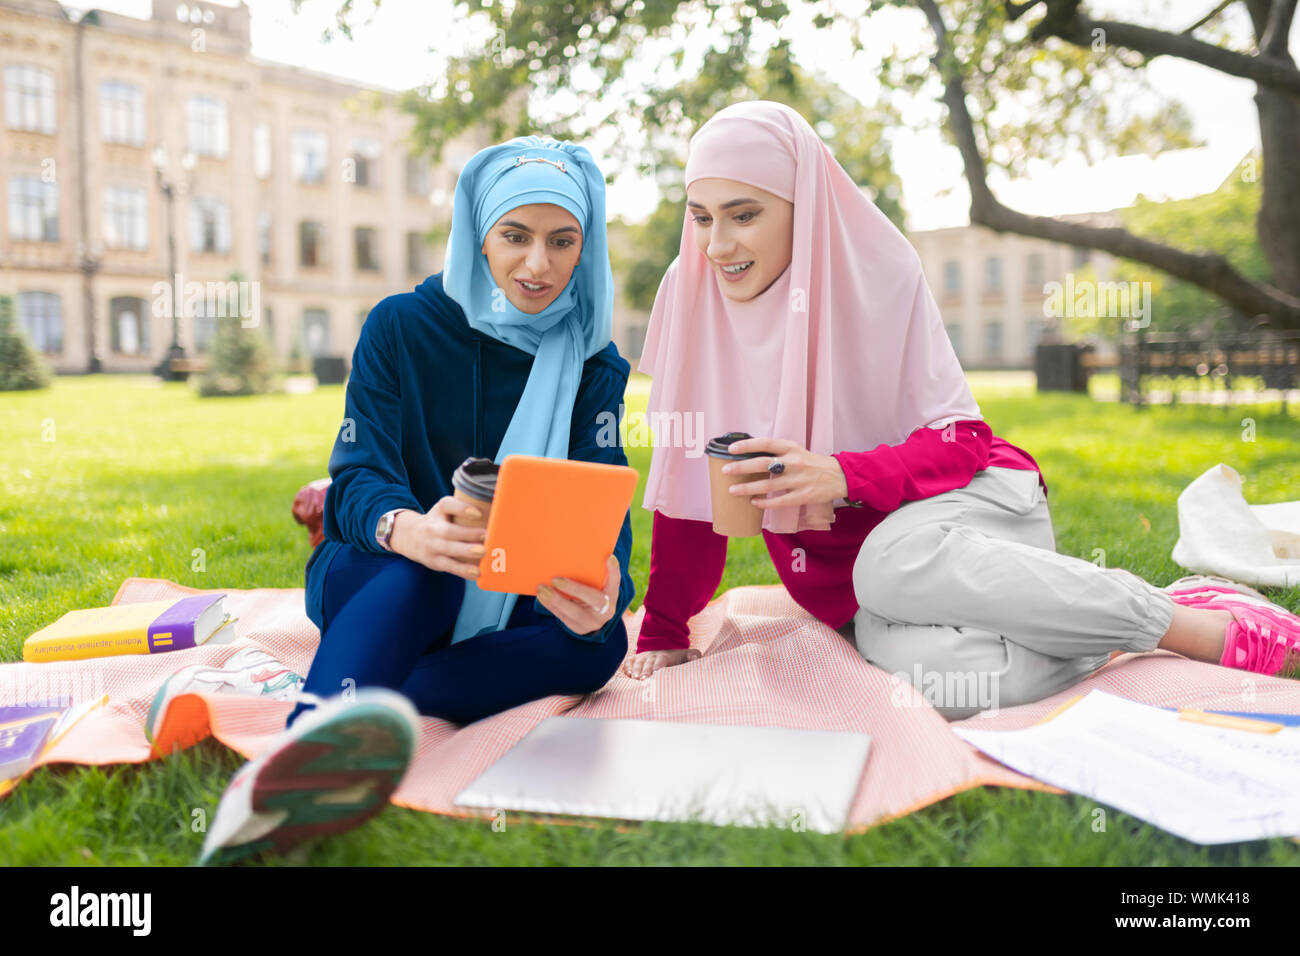 Muslim students watching video on tablet and drinking coffee Stock Photo